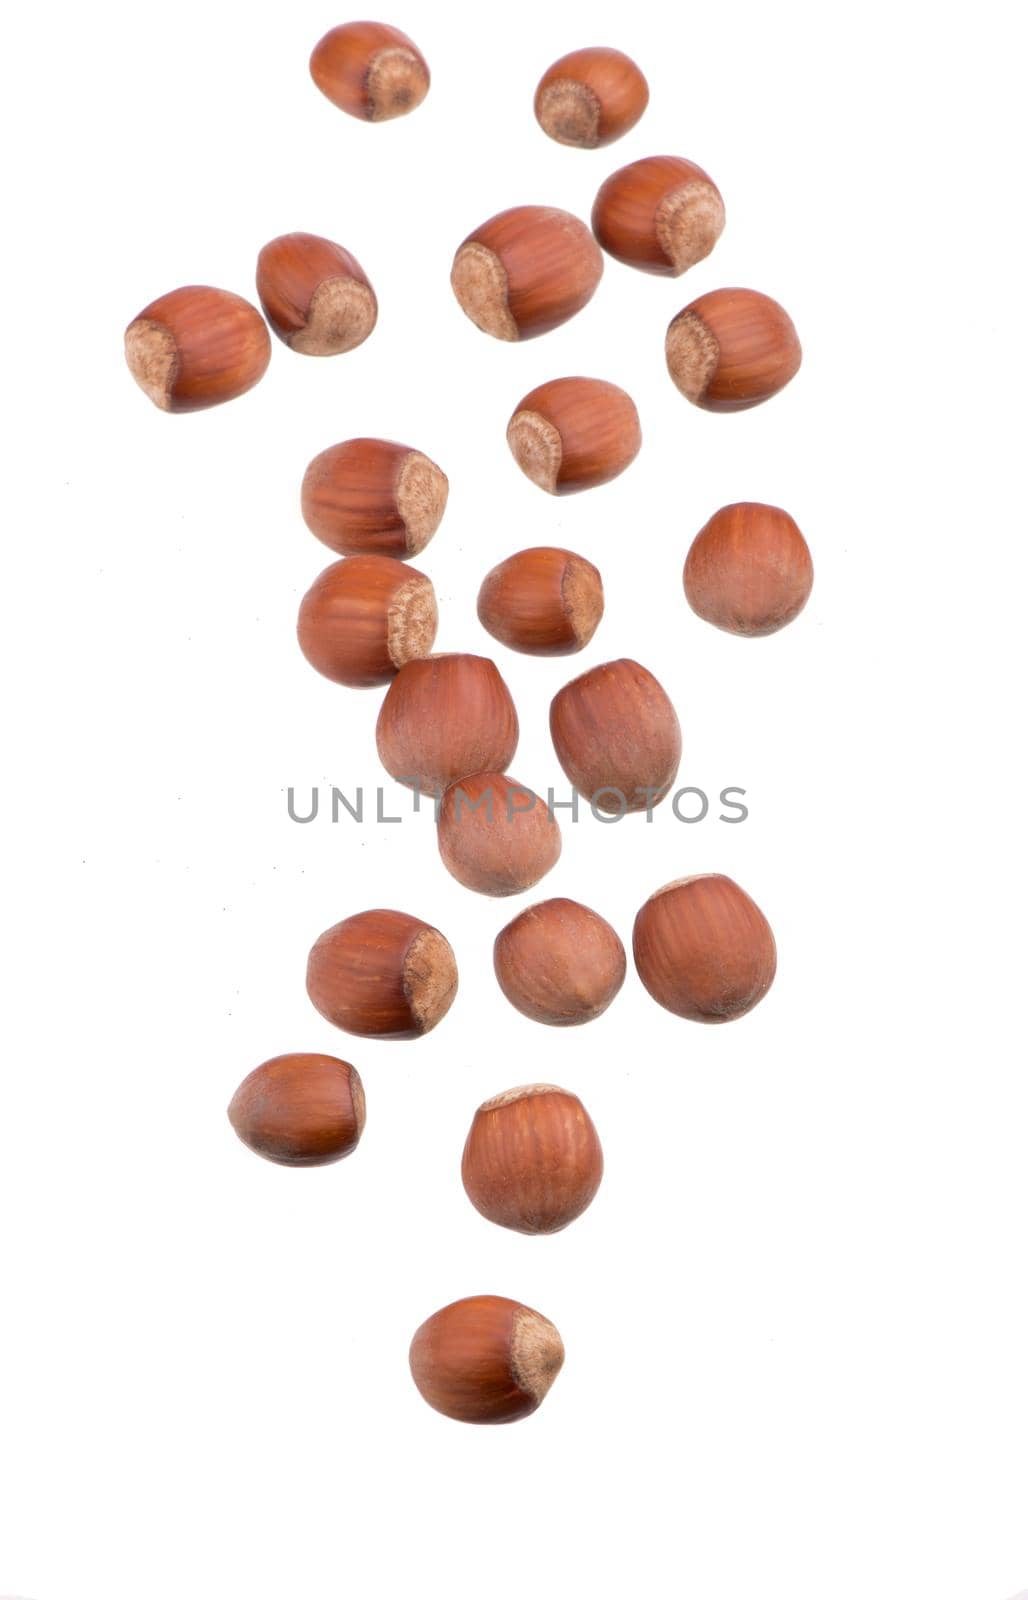 Closeup of hazelnuts, isolated on the white background by aprilphoto